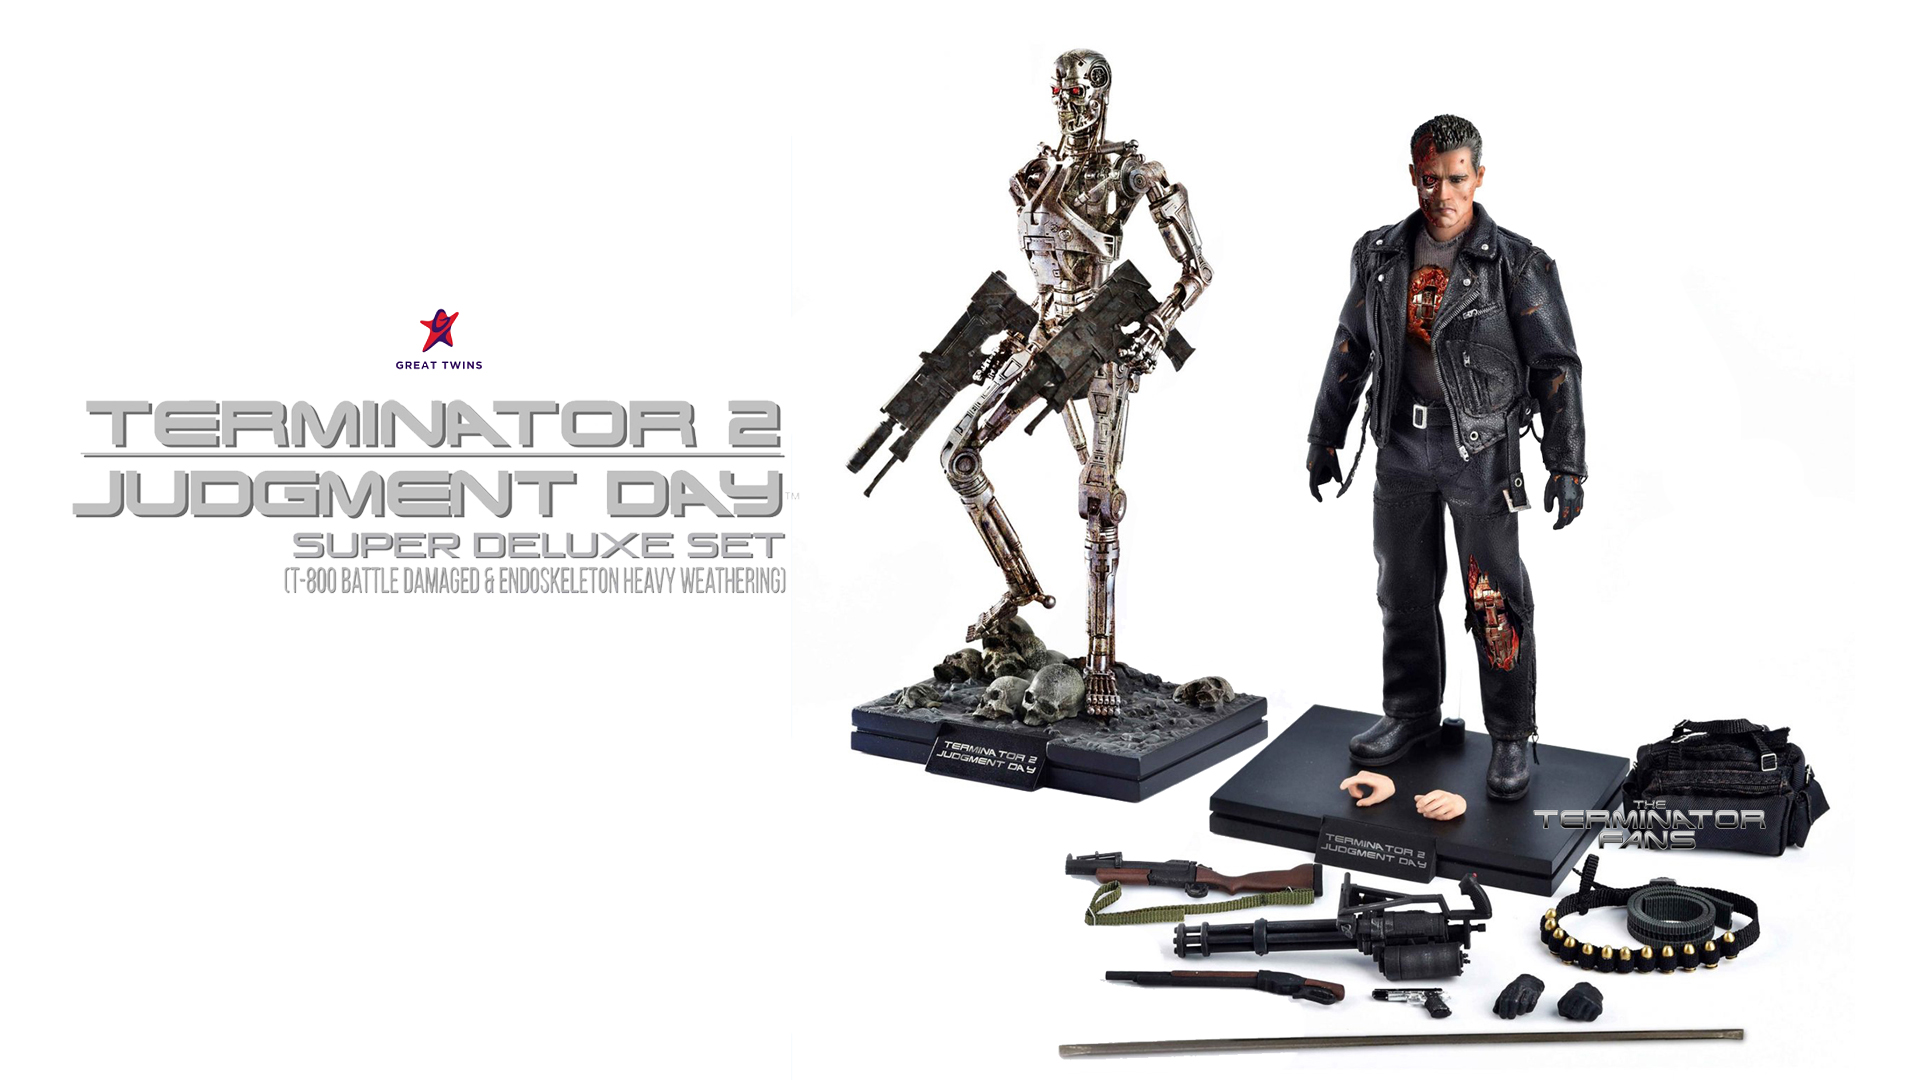 TERMINATOR 2: JUDGMENT DAY – T-800 CSM-101 + Endoskeleton SUPER DELUXE  SET by GREAT TWINS